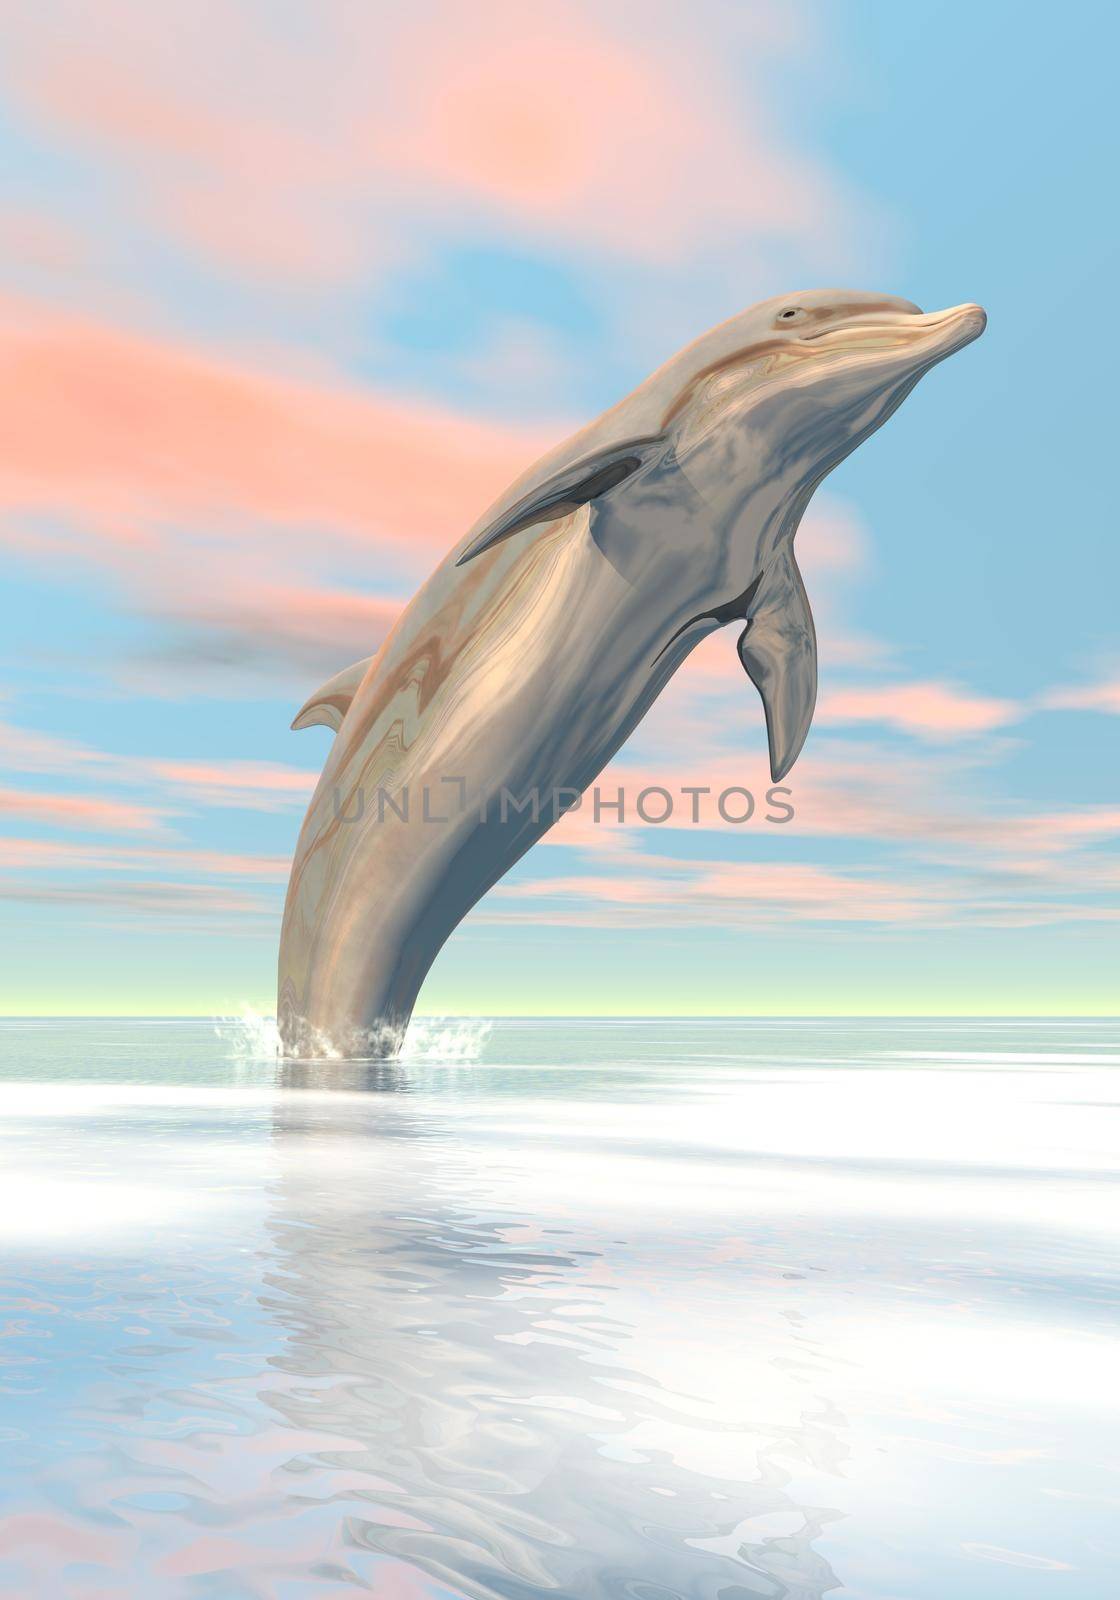 One dolphin jumping upon the ocean by sunset light